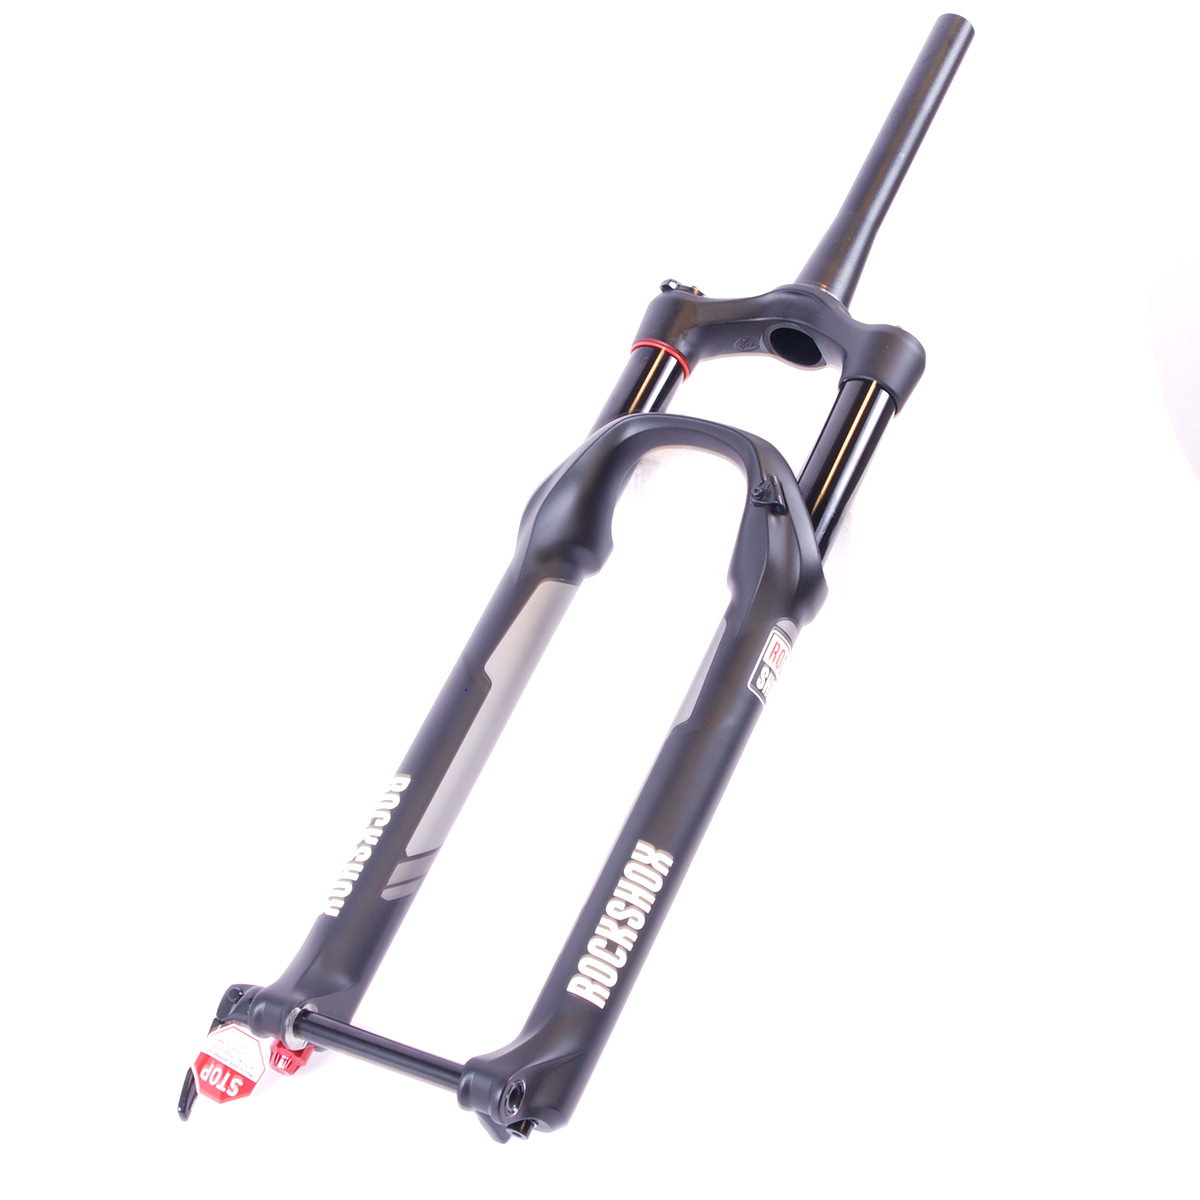 Rockshox Pike Rct3 29 15mm Solo Air 120mm Diffusion Black Tapered Fork Ebay 